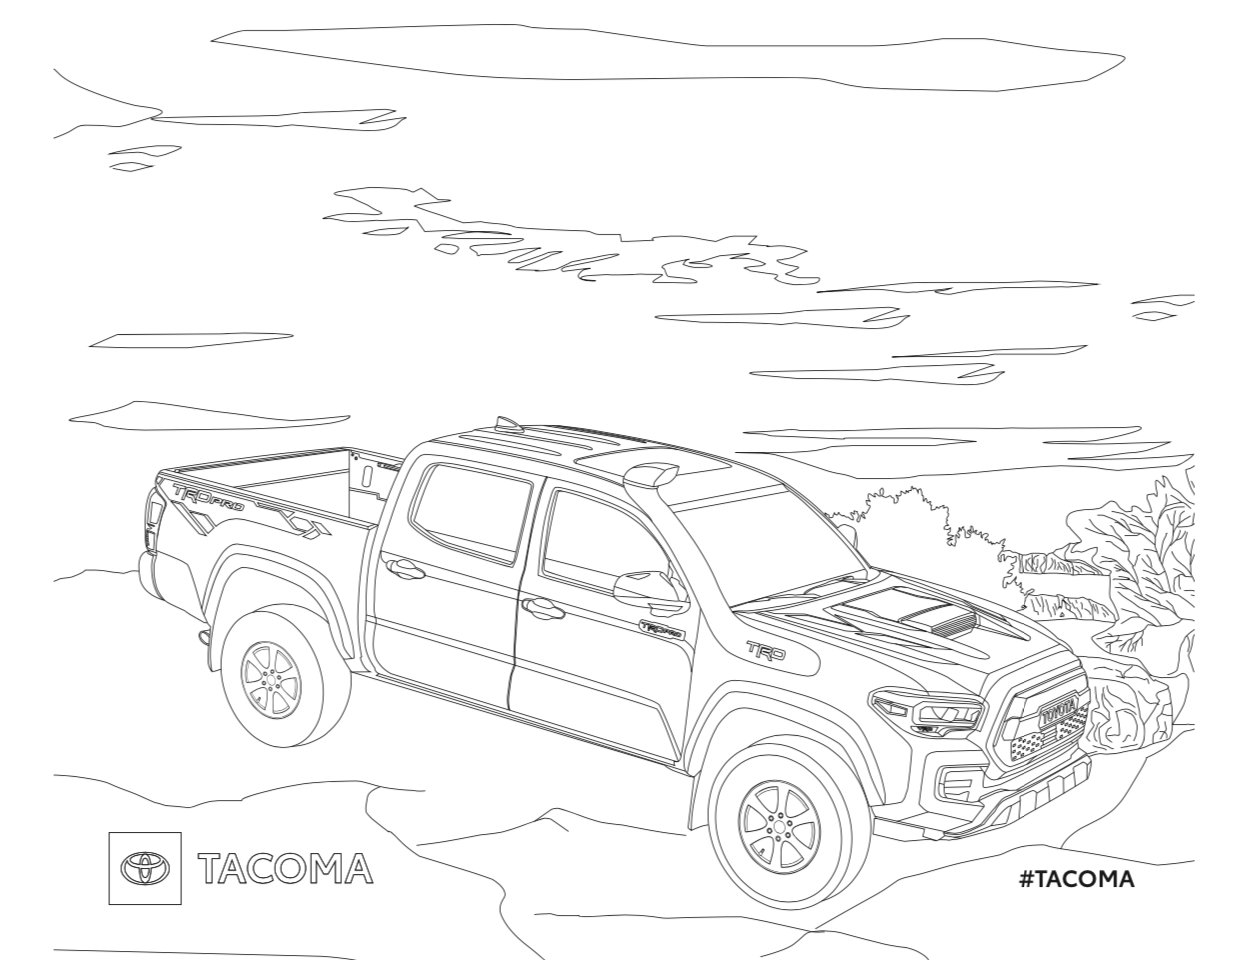 Toyota usa on x what drives your creativity our toyota activity book provides off